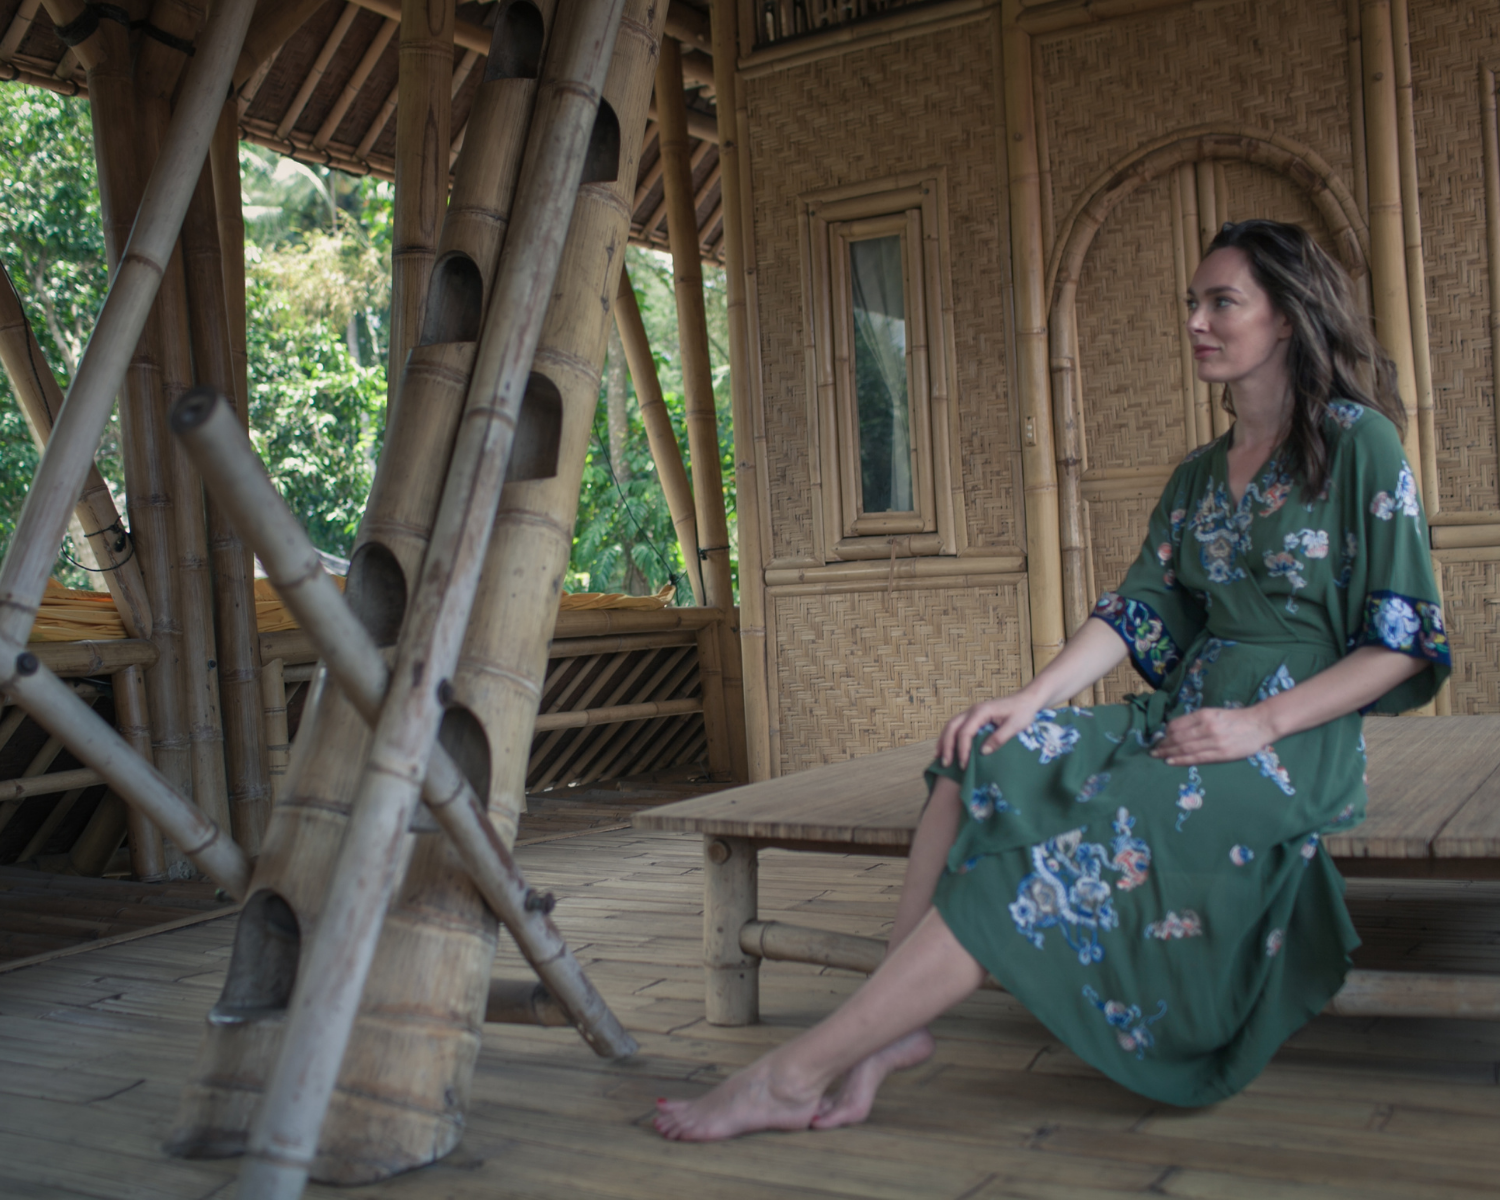 Woman in a green dress sitting in a bamboo hut